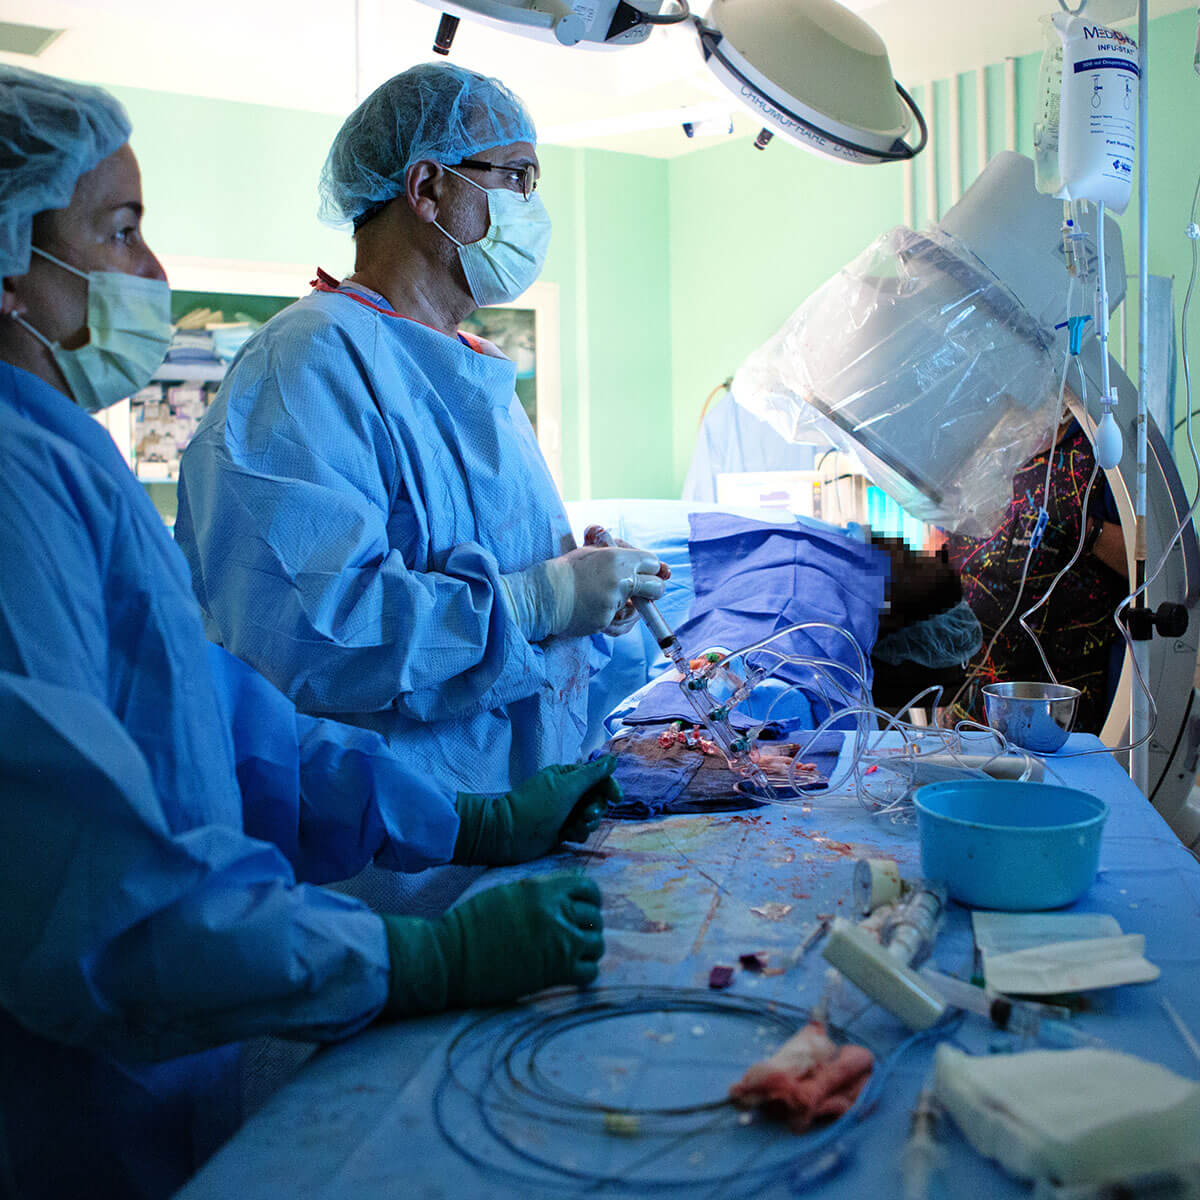 An interventional cardiologist performs a heart procedure while surrounded by other physicians and staff.